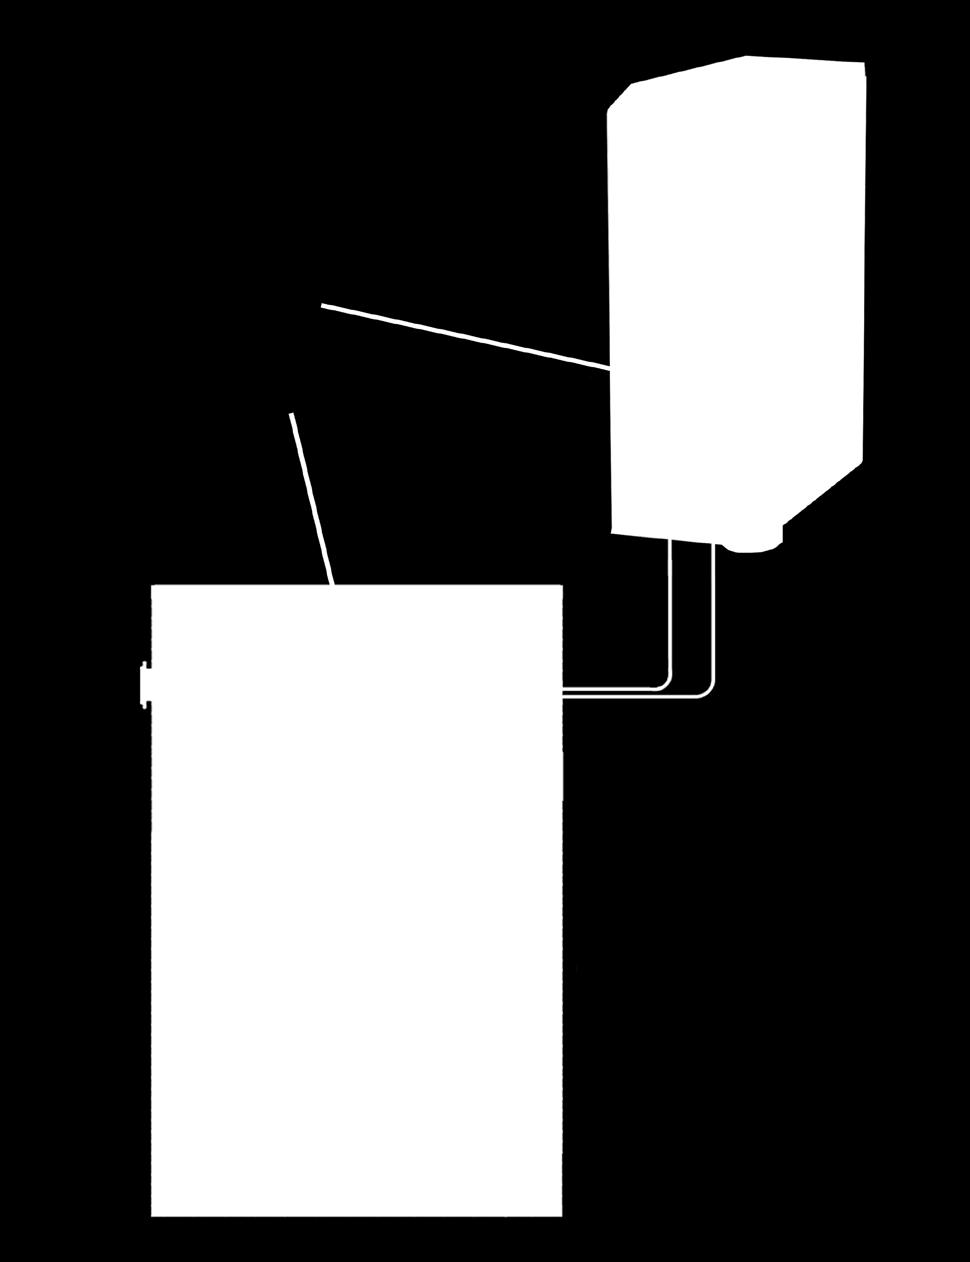 A leak in the system, through which air can diffuse, leads to a drop in pressure and subsequently a malfunction of the device.